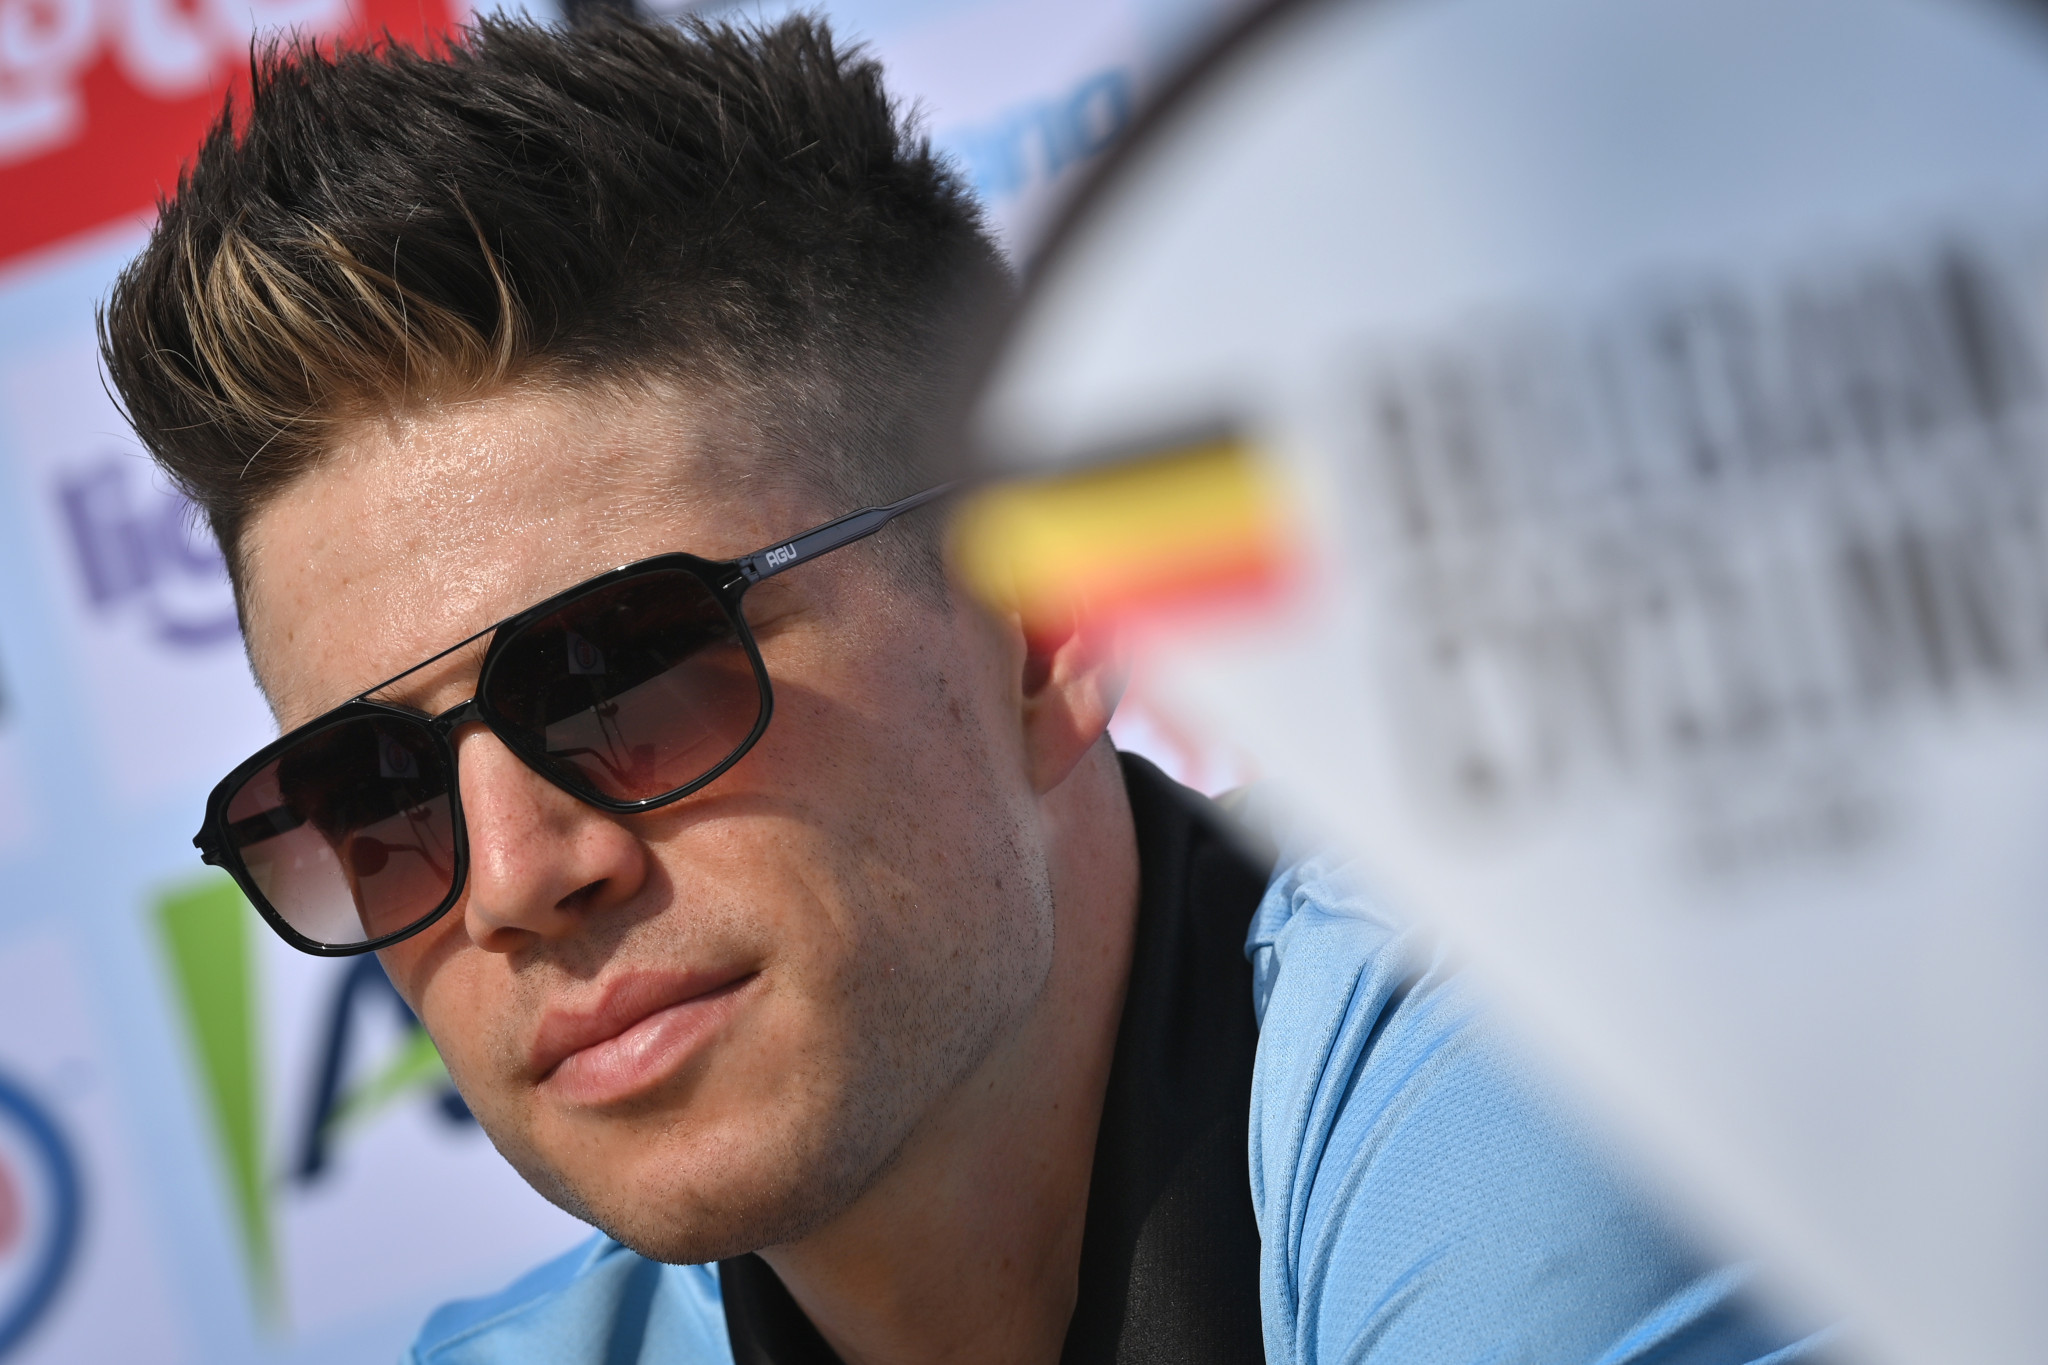 Wout van Aert will be a contender for the men's time trial and road race titles ©Getty Images